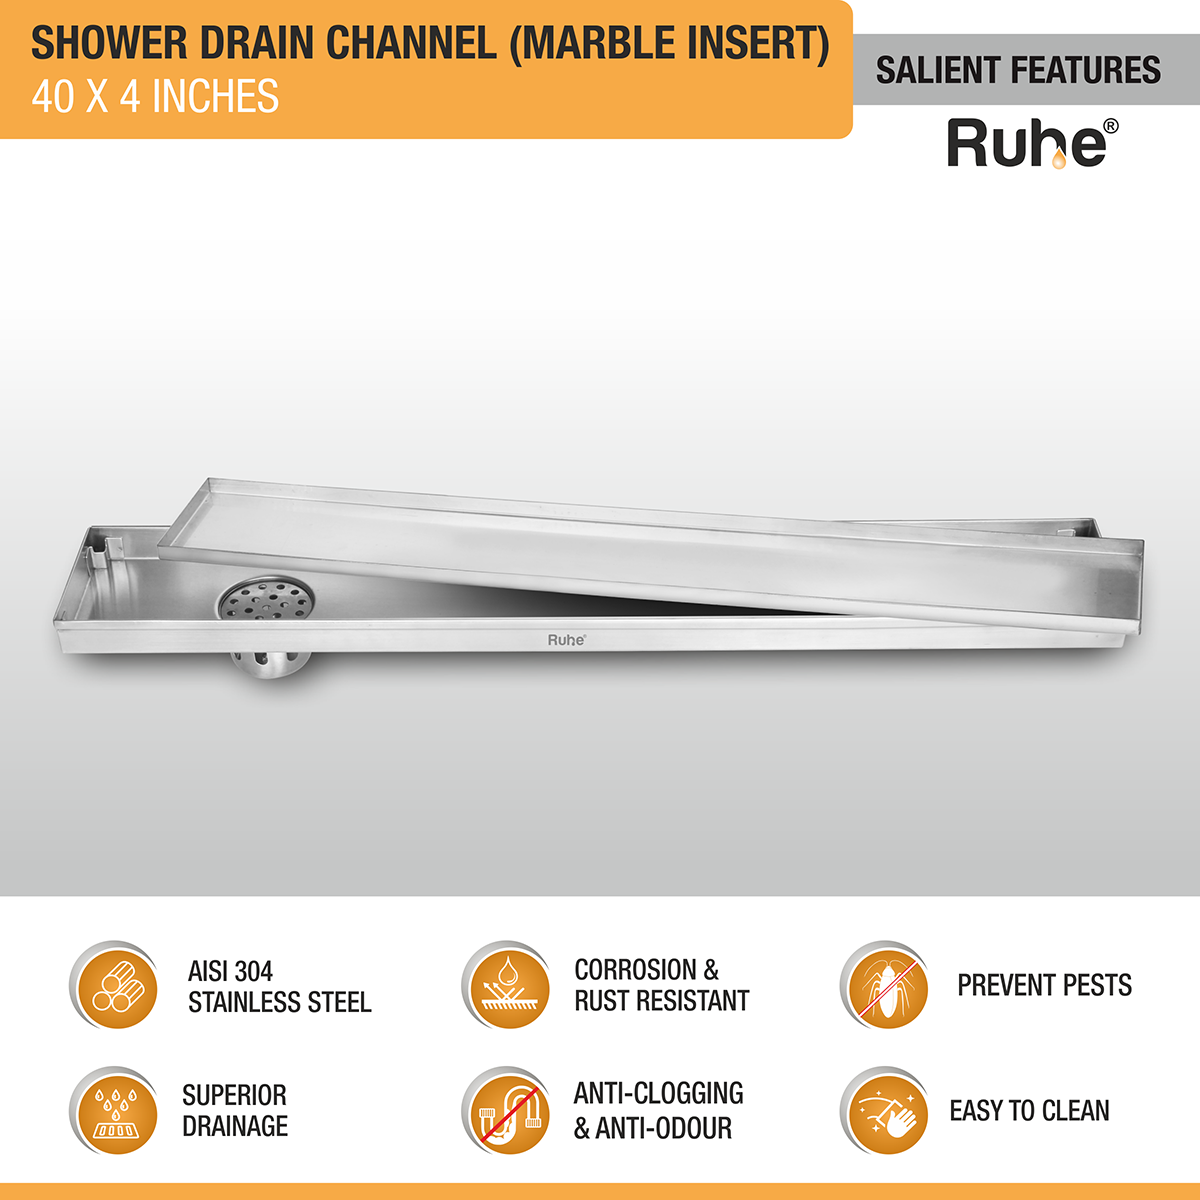 Marble Insert Shower Drain Channel (40 x 4 Inches) with Cockroach Trap (304 Grade) features